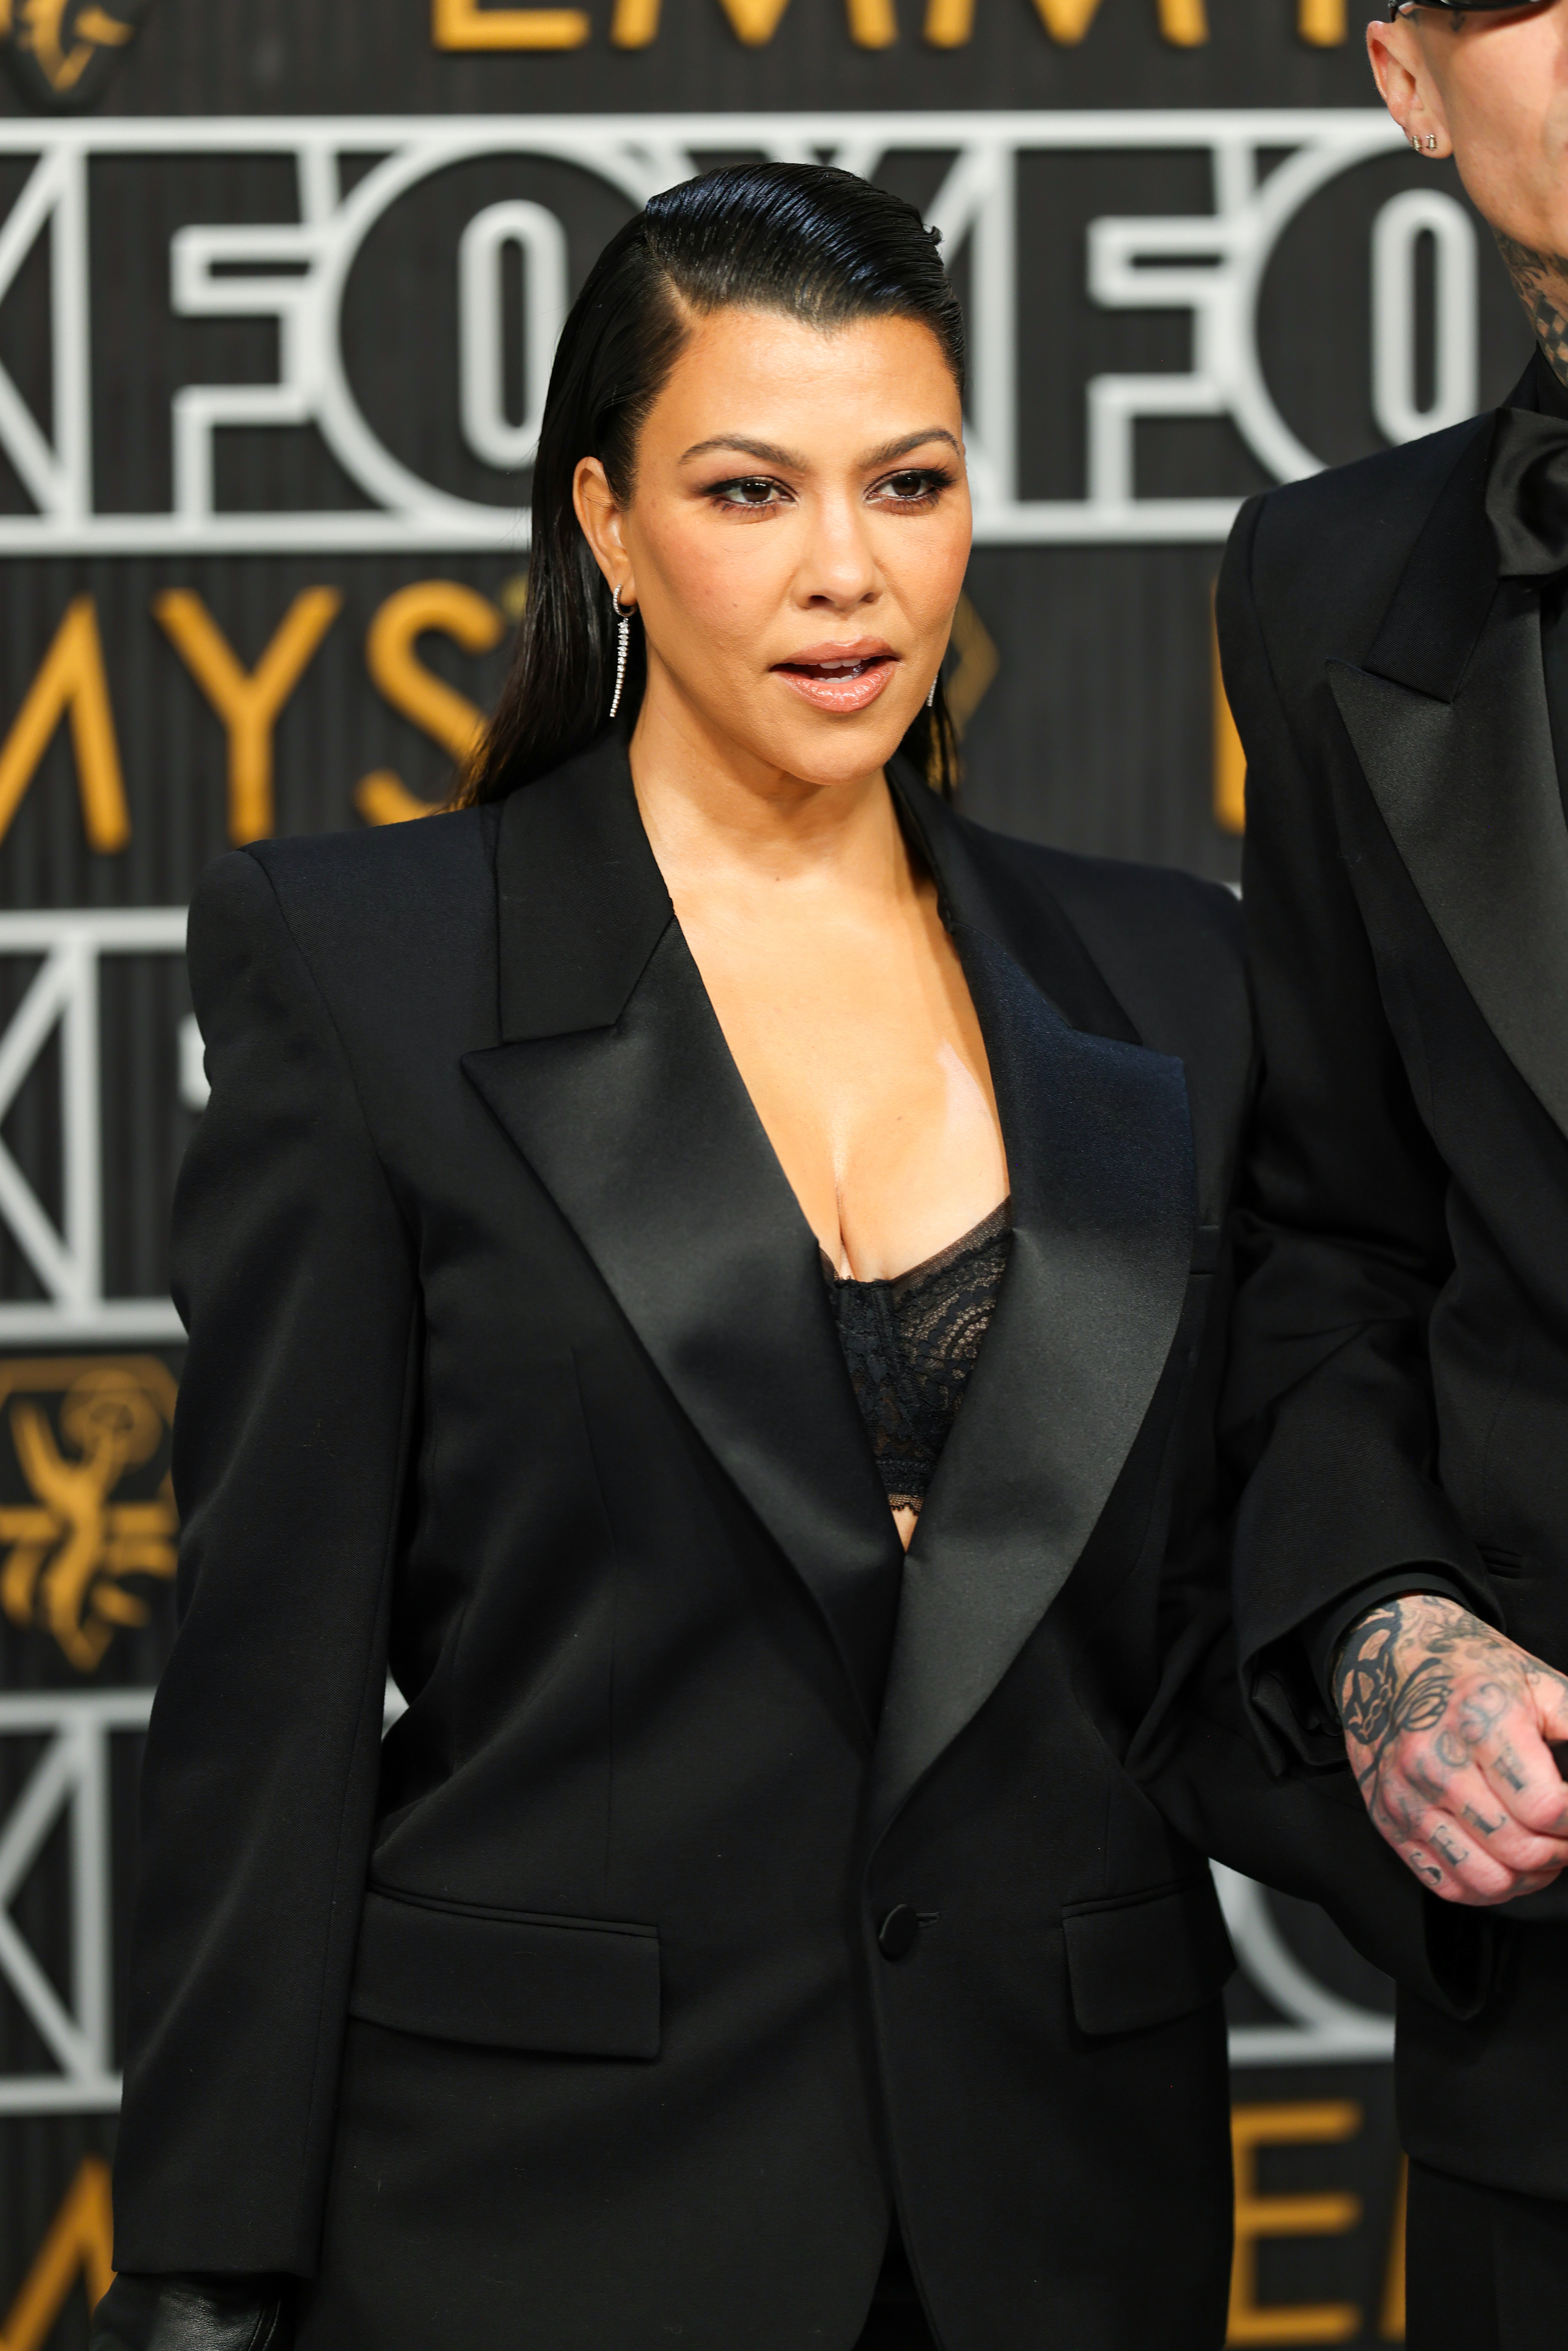 Kourtney Kardashian in a black suit with a sheer detail, standing next to a tattooed person at an event